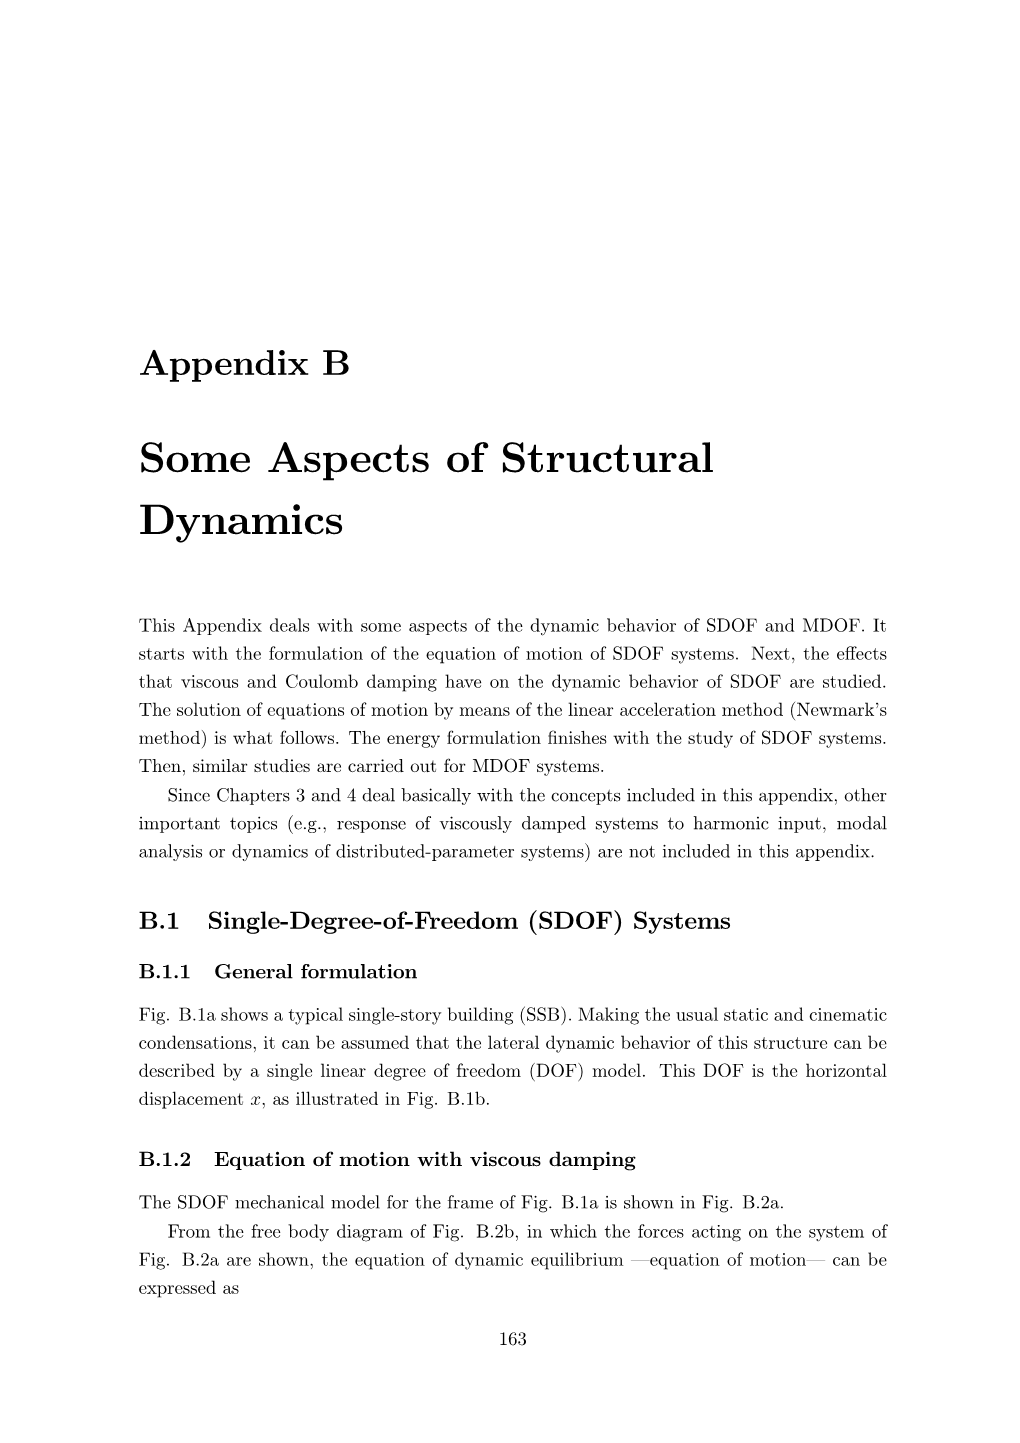 Some Aspects of Structural Dynamics